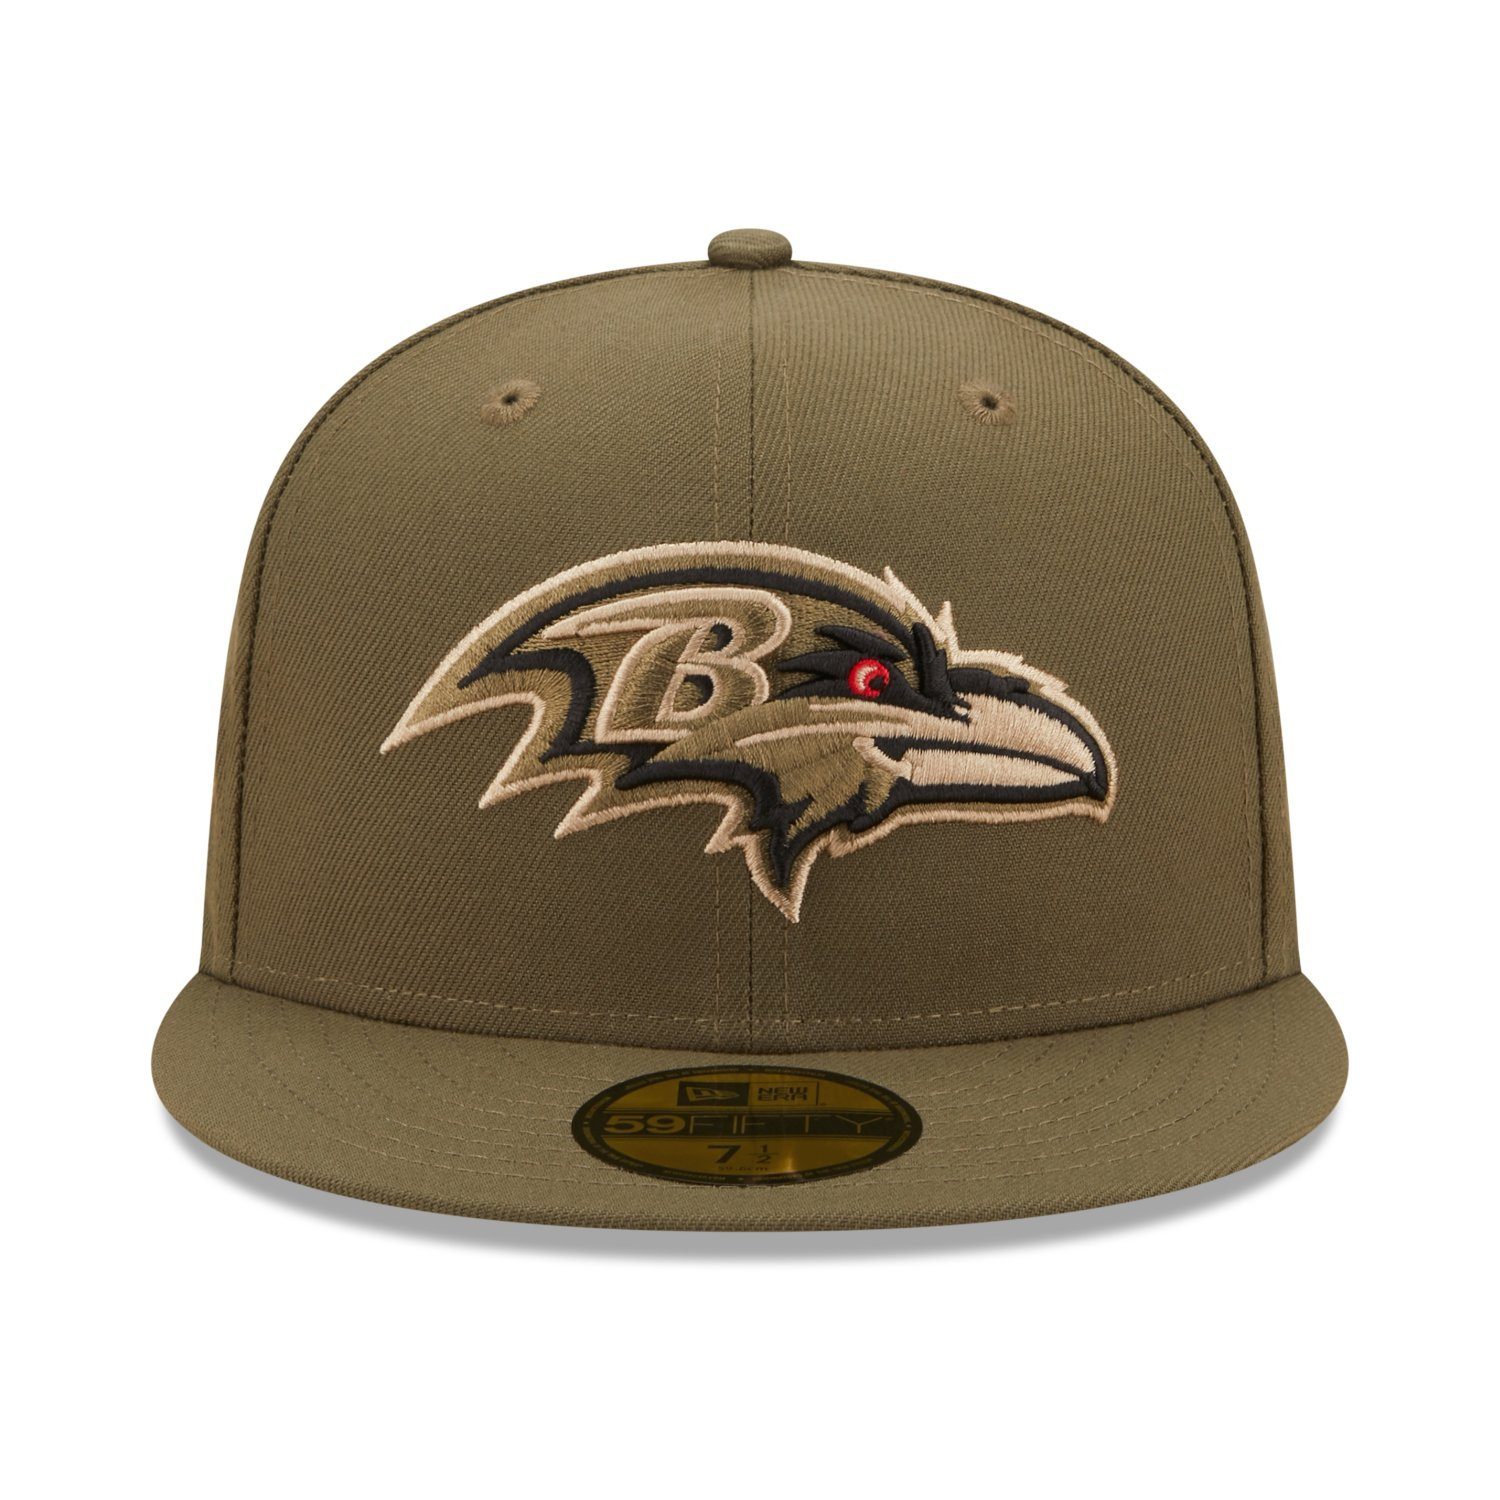 NFL ProBowl Baltimore New Cap Throwback Era Ravens 59Fifty Superbowl Fitted